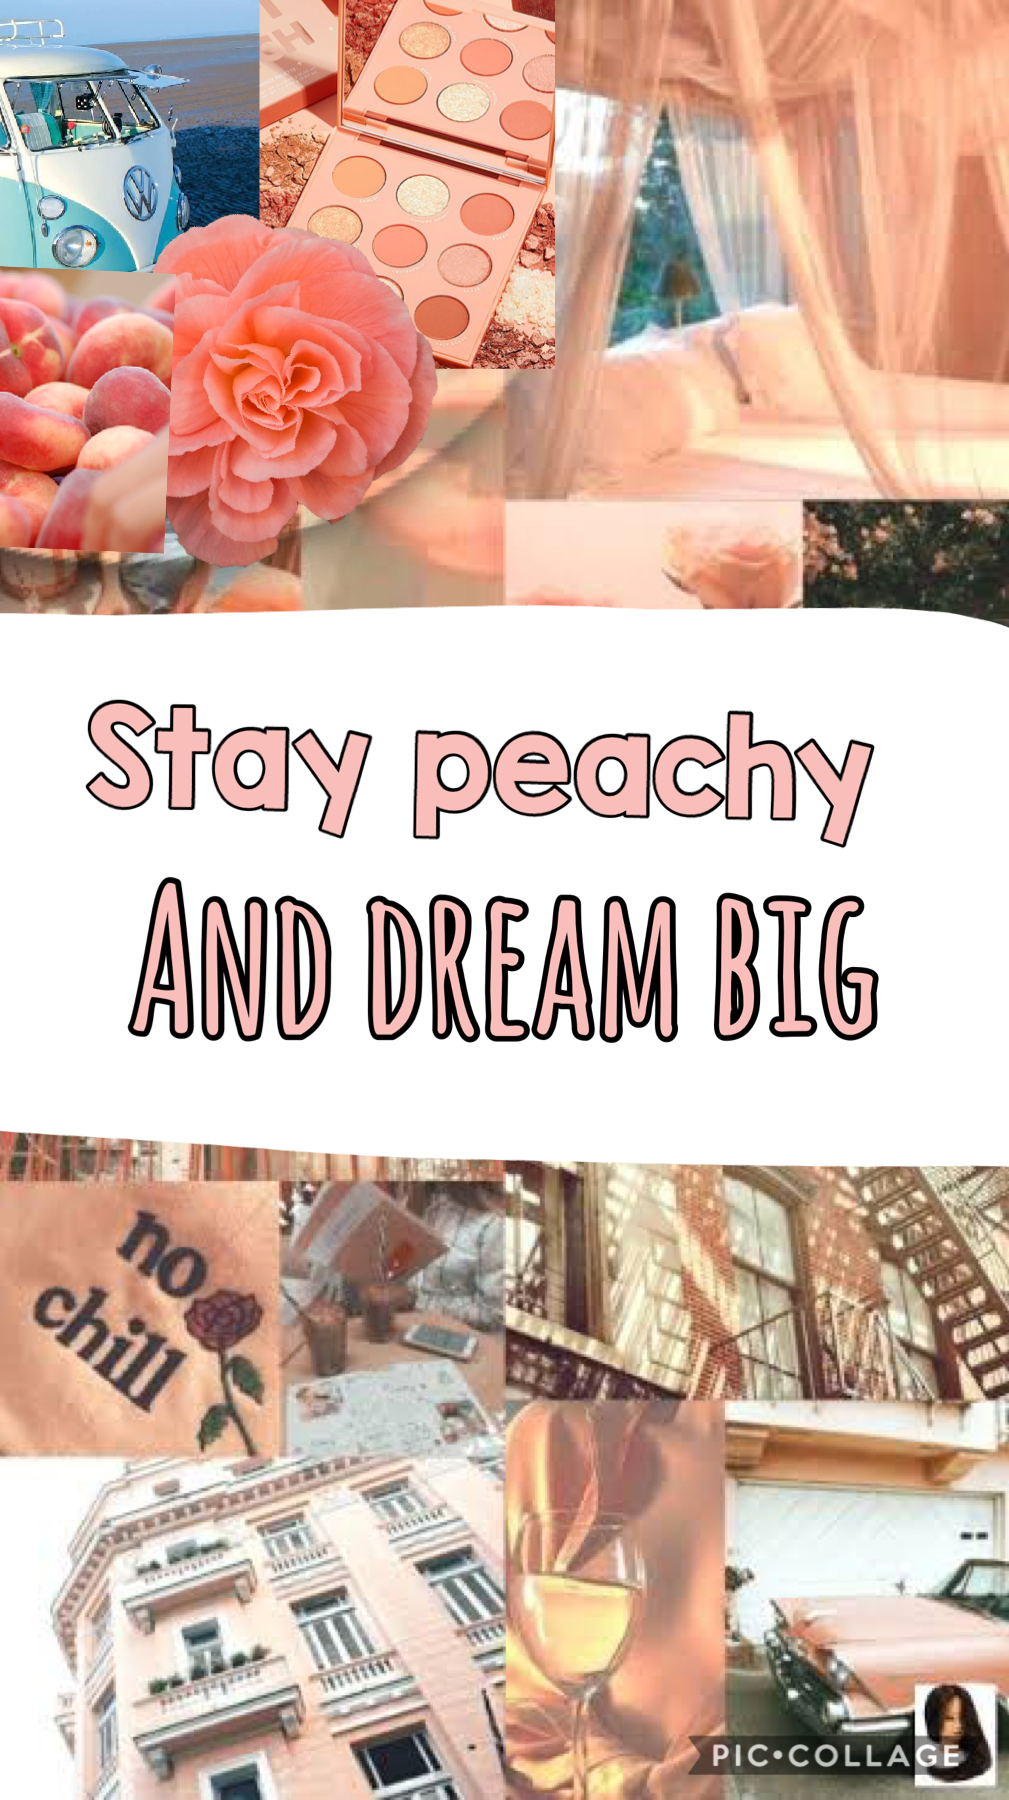 Stay peachy! 🍑💖✌🏻
QOTD: favourite fruit
AOTD: apricots and raspberries and strawberries and blueberries and Cherry’s and watermelon 🍉 🍒🍓